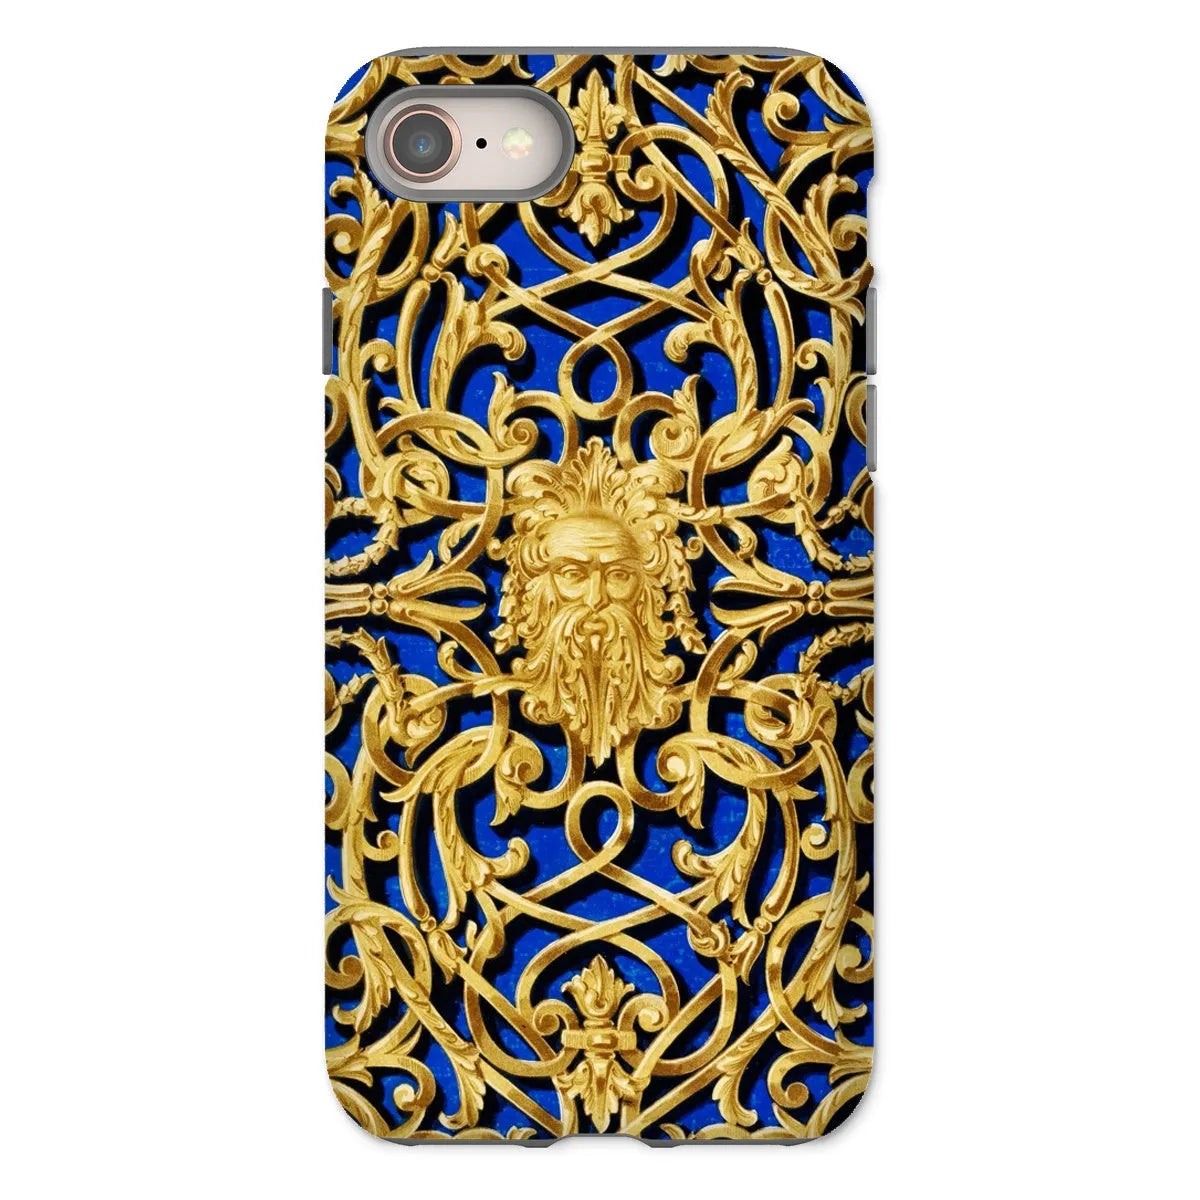 Gilded Gate Victorian Phone Case - Sir Matthew Digby Wyatt - Iphone 8 / Matte - Mobile Phone Cases - Aesthetic Art